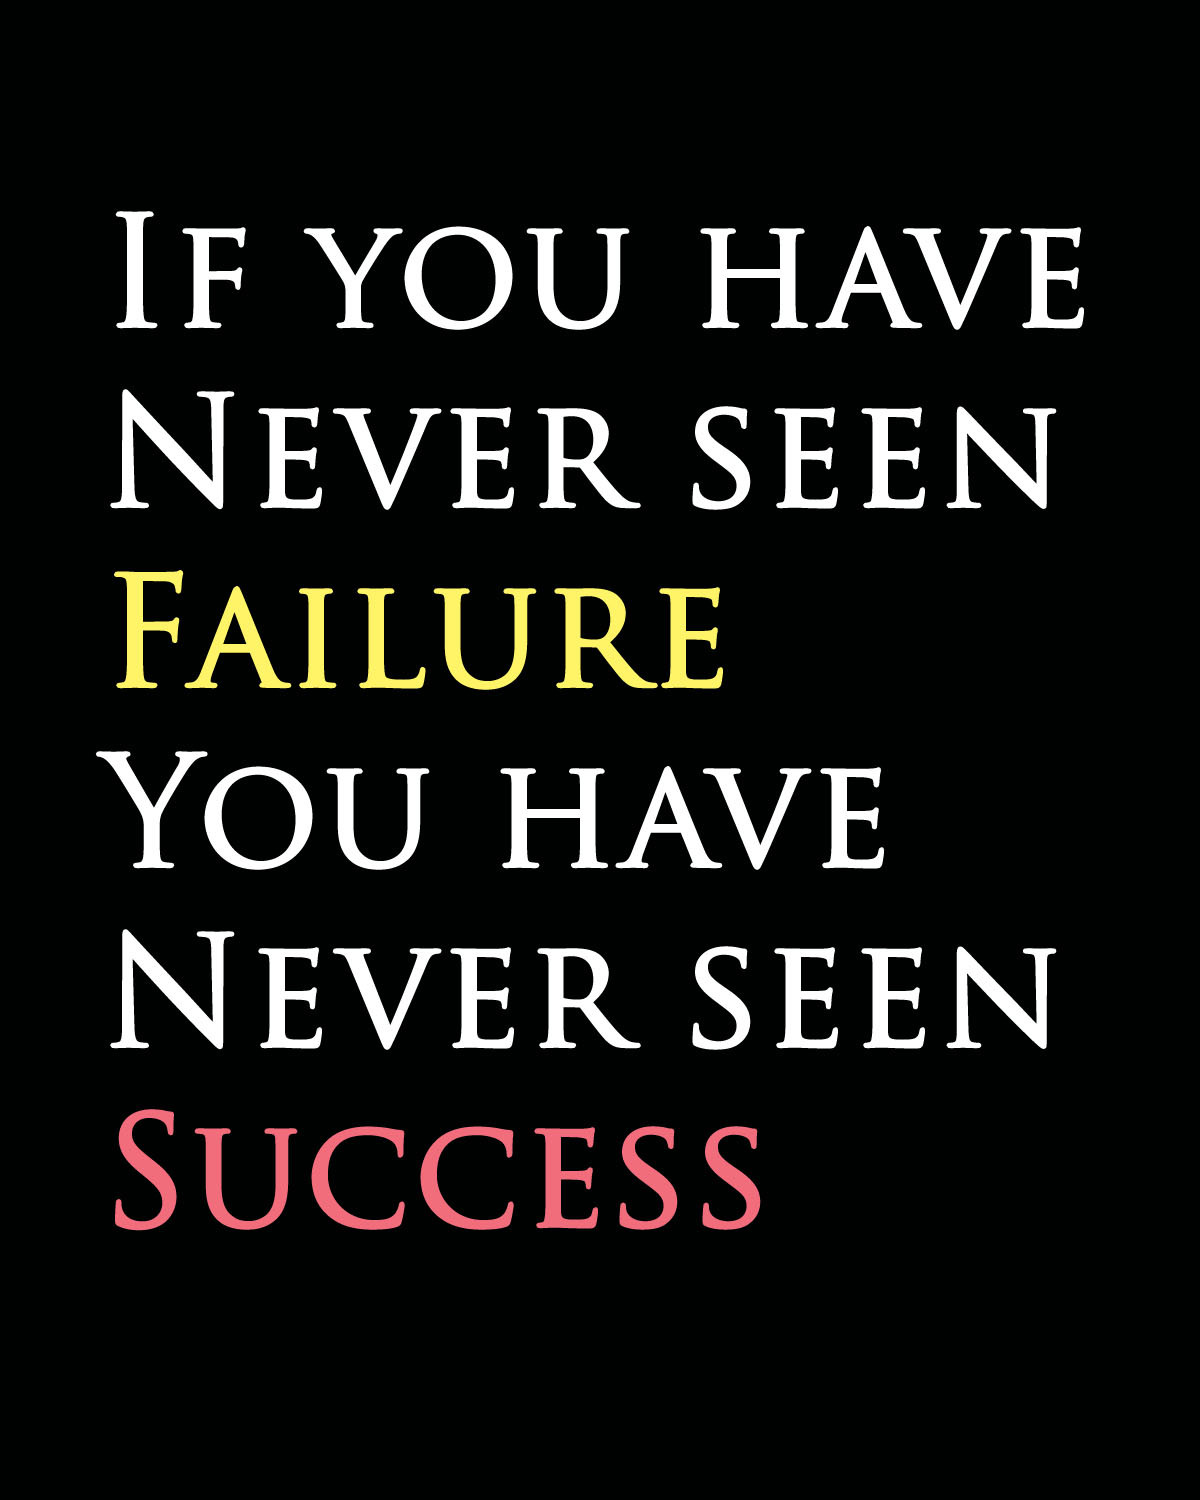 Motivational Quotes About Failure
 26 Best Collection of Failure Quotes to Motivate You